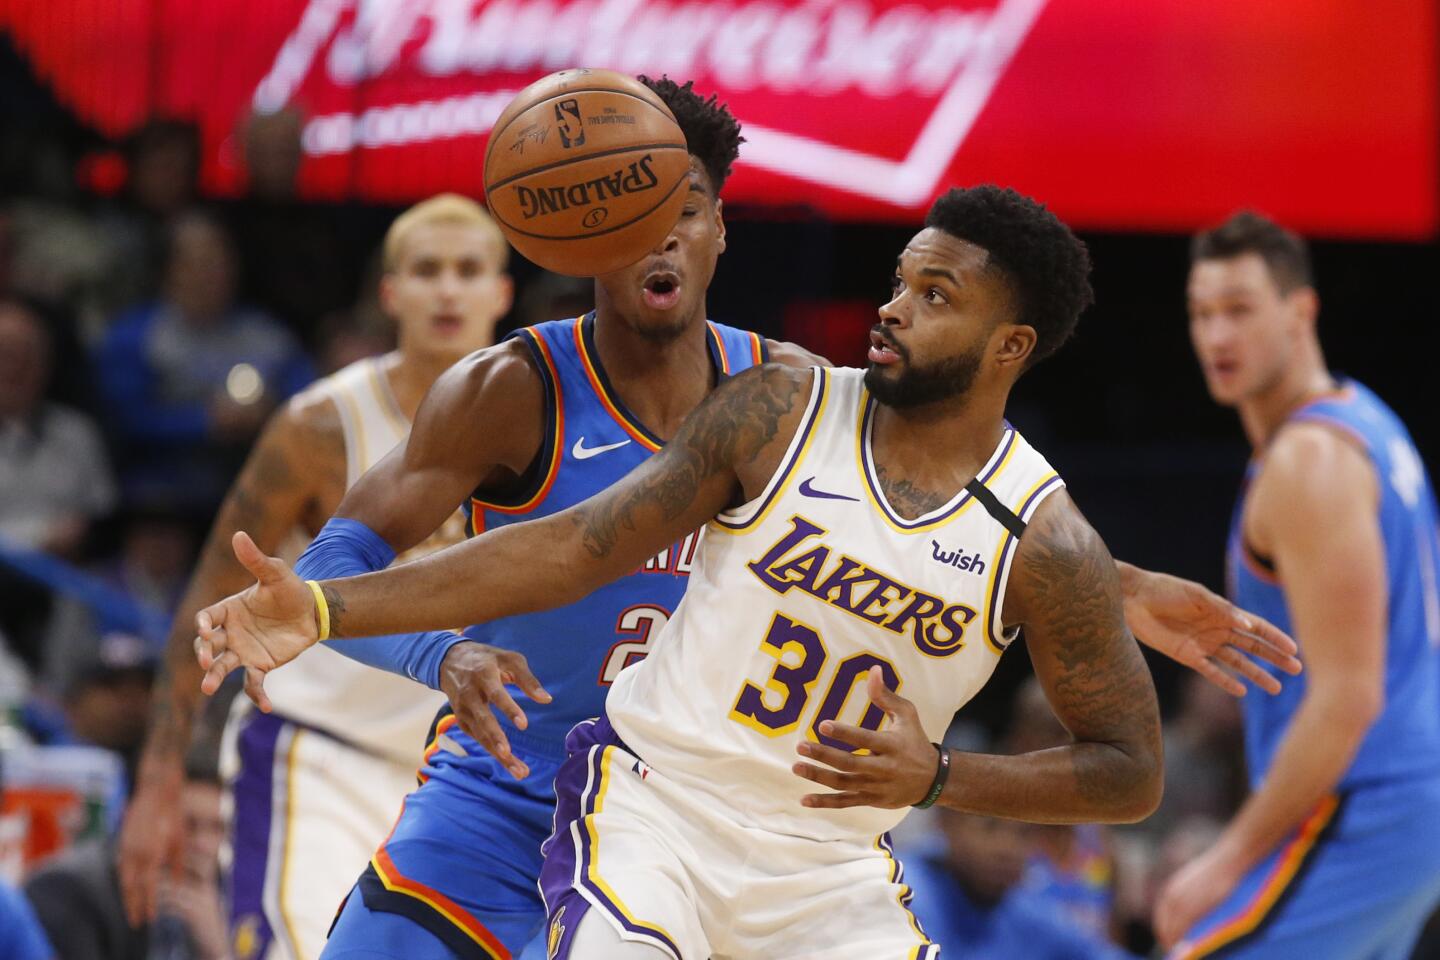 Thunder guard Shai Gilgeous-Alexander knocks the ball away from Lakers guard Troy Daniels during the second half of a game Jan. 11.